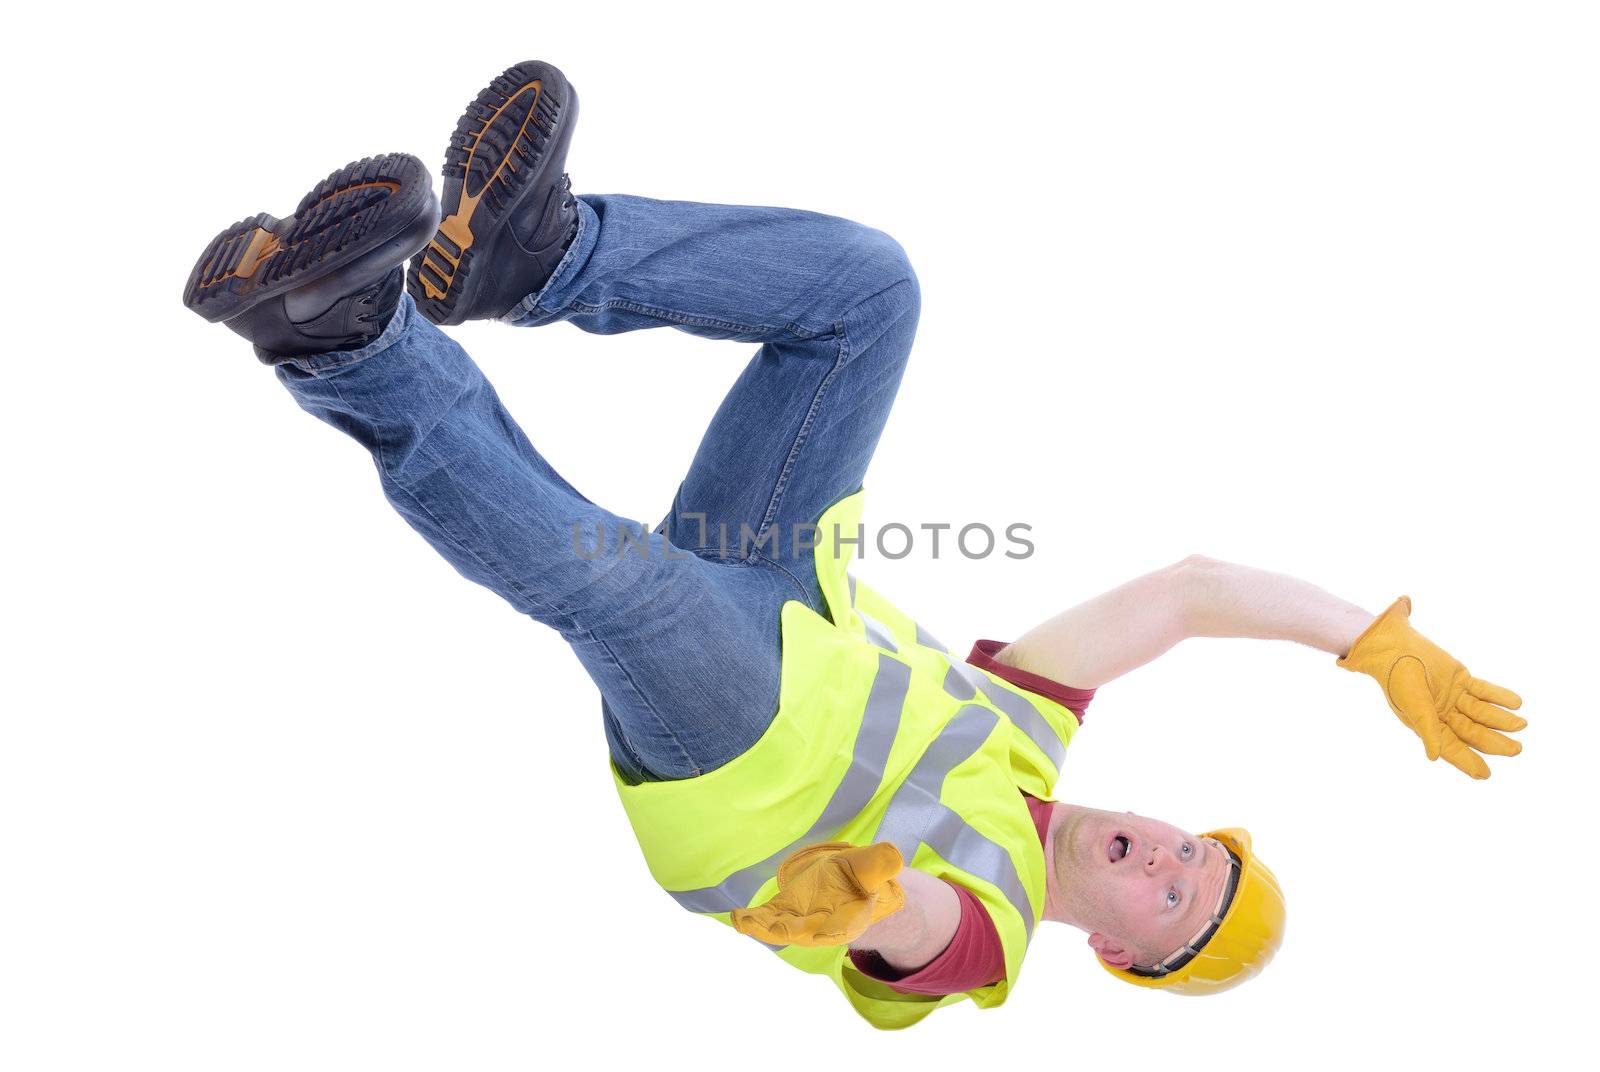 Construction worker falling by hyrons